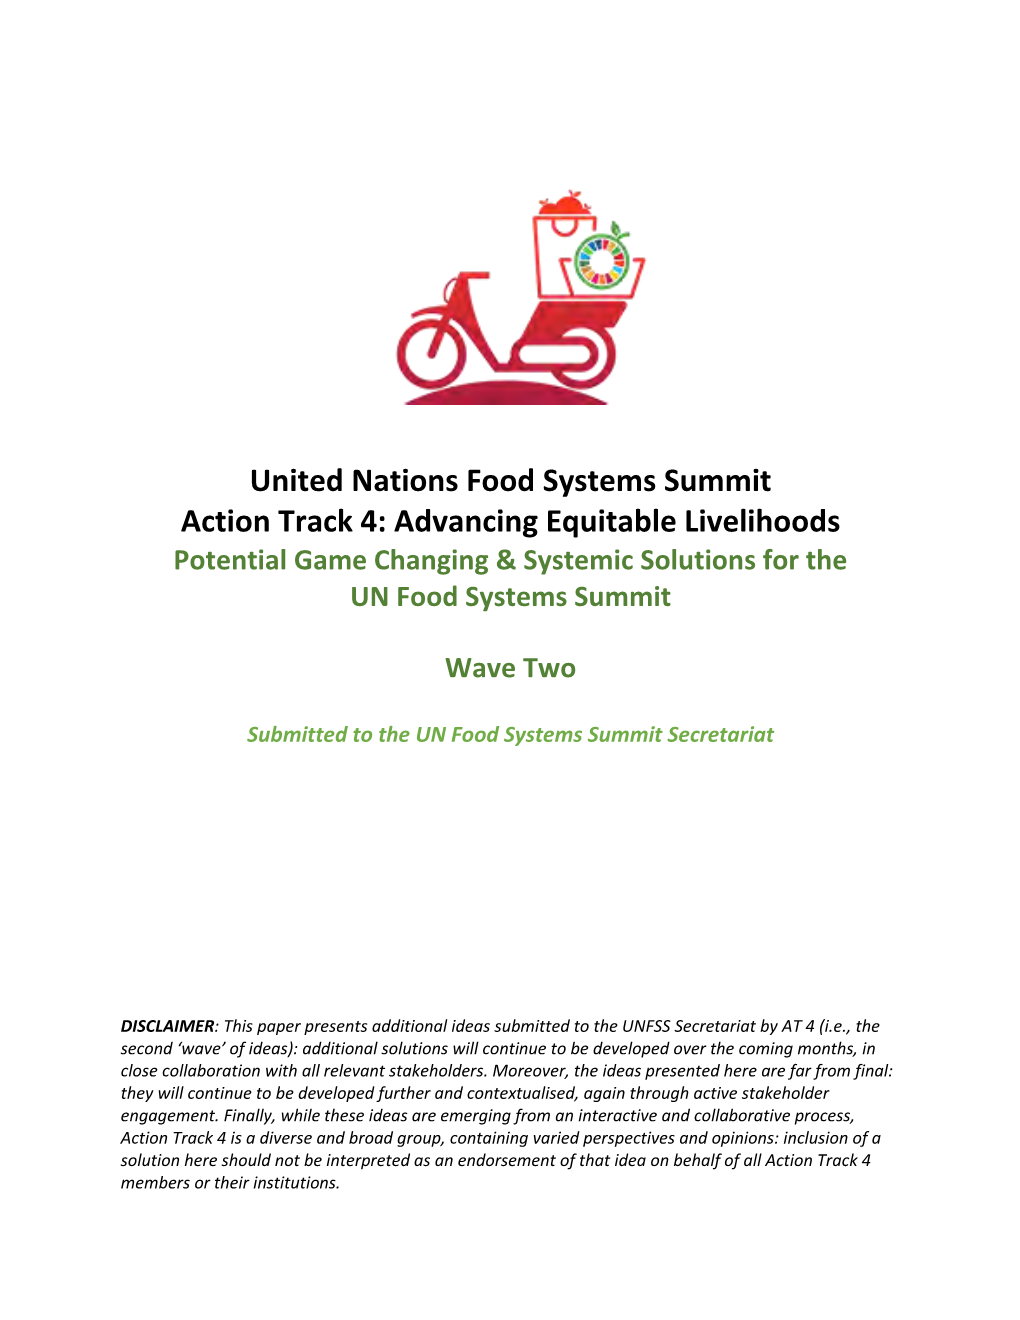 United Nations Food Systems Summit Action Track 4: Advancing Equitable Livelihoods Potential Game Changing & Systemic Solutions for the UN Food Systems Summit